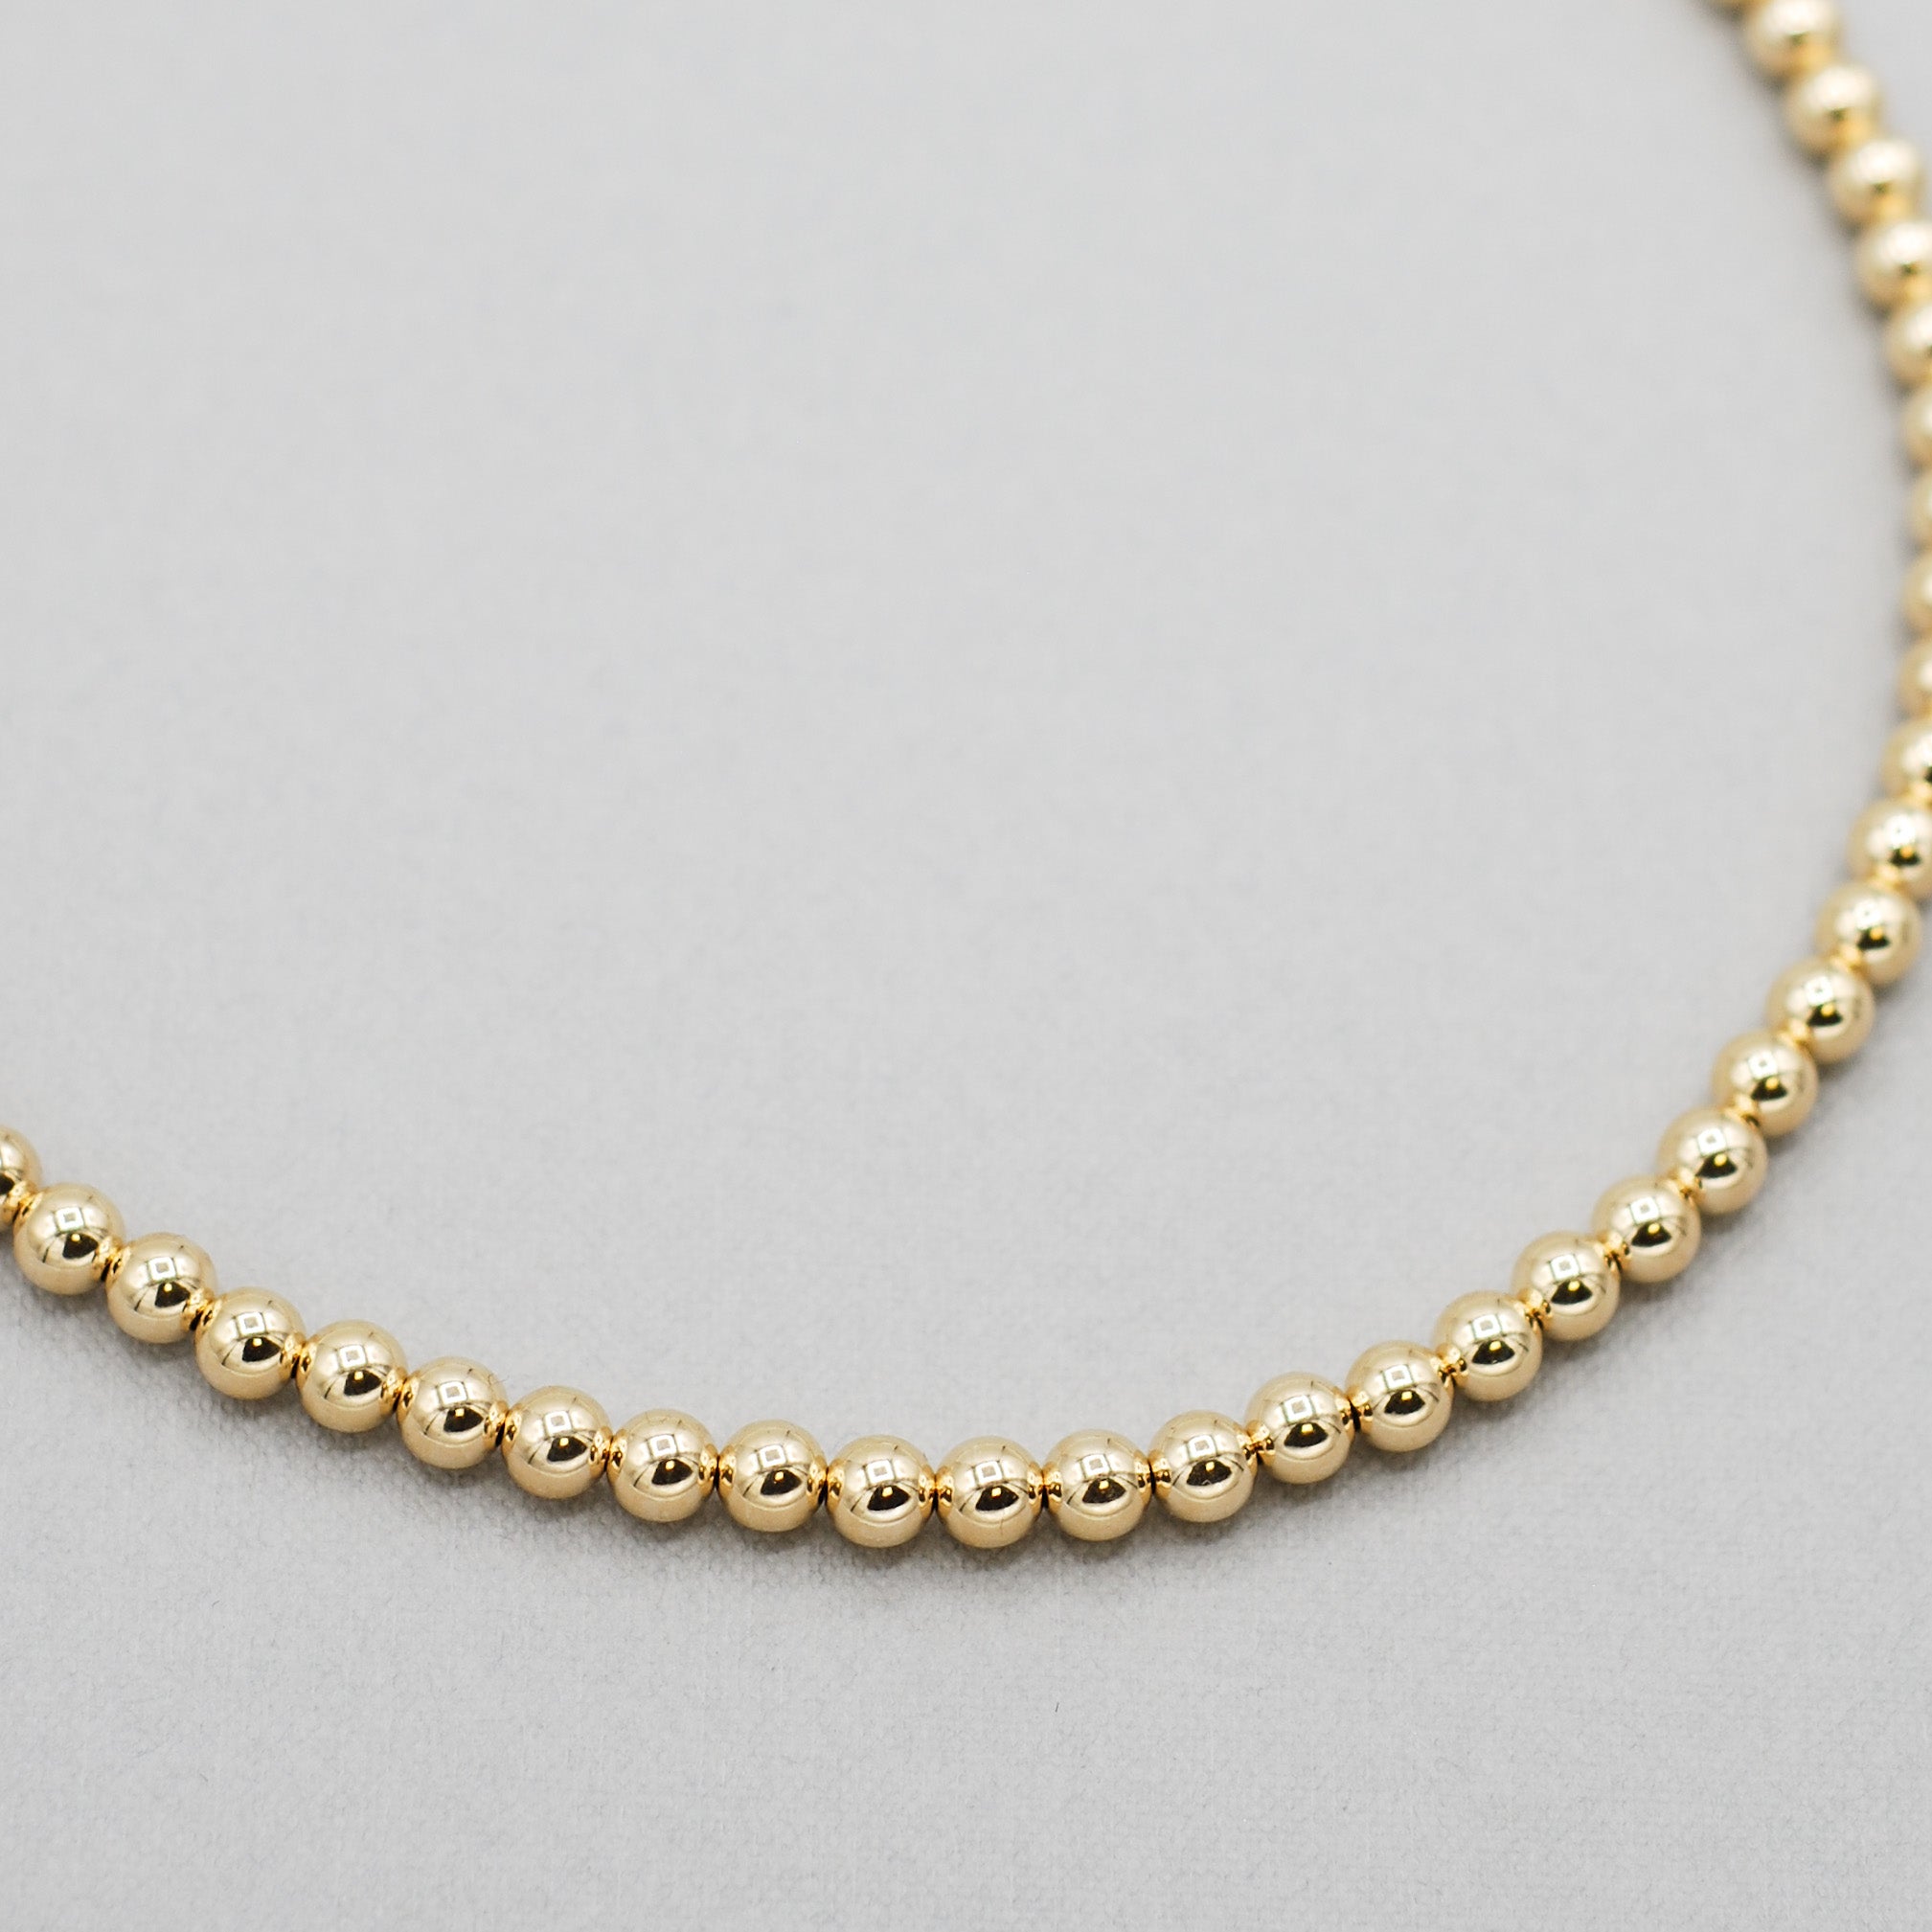 14k Gold Filled 6mm Beaded Lux Necklace - Jewel Ya